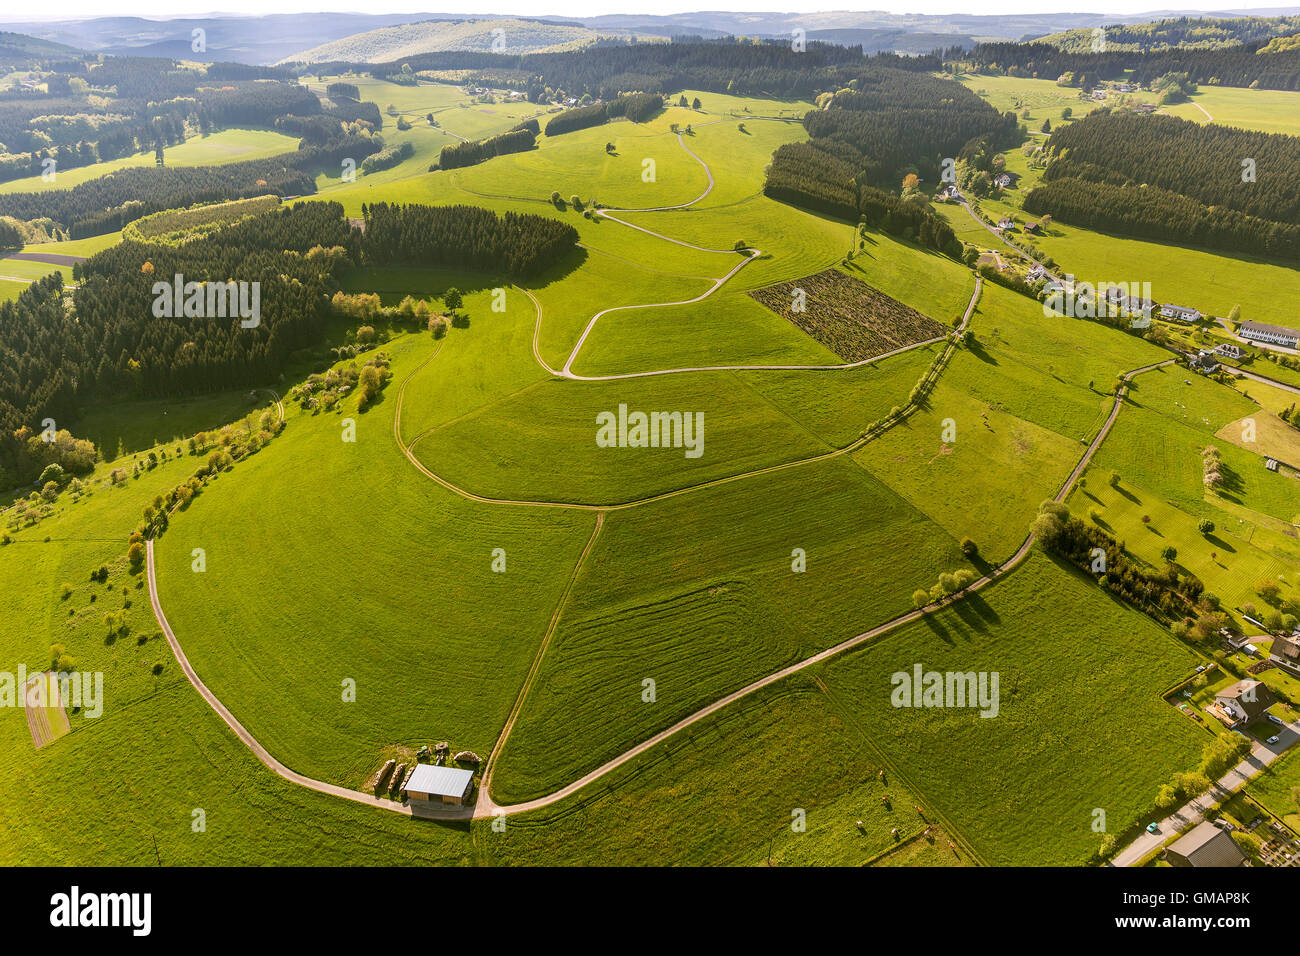 Aerial view, Cyril surfaces, hills, paths aligned isohypses, Wunderthausen, Bad Berleburg, Aerial view of Wittgenstein, Stock Photo